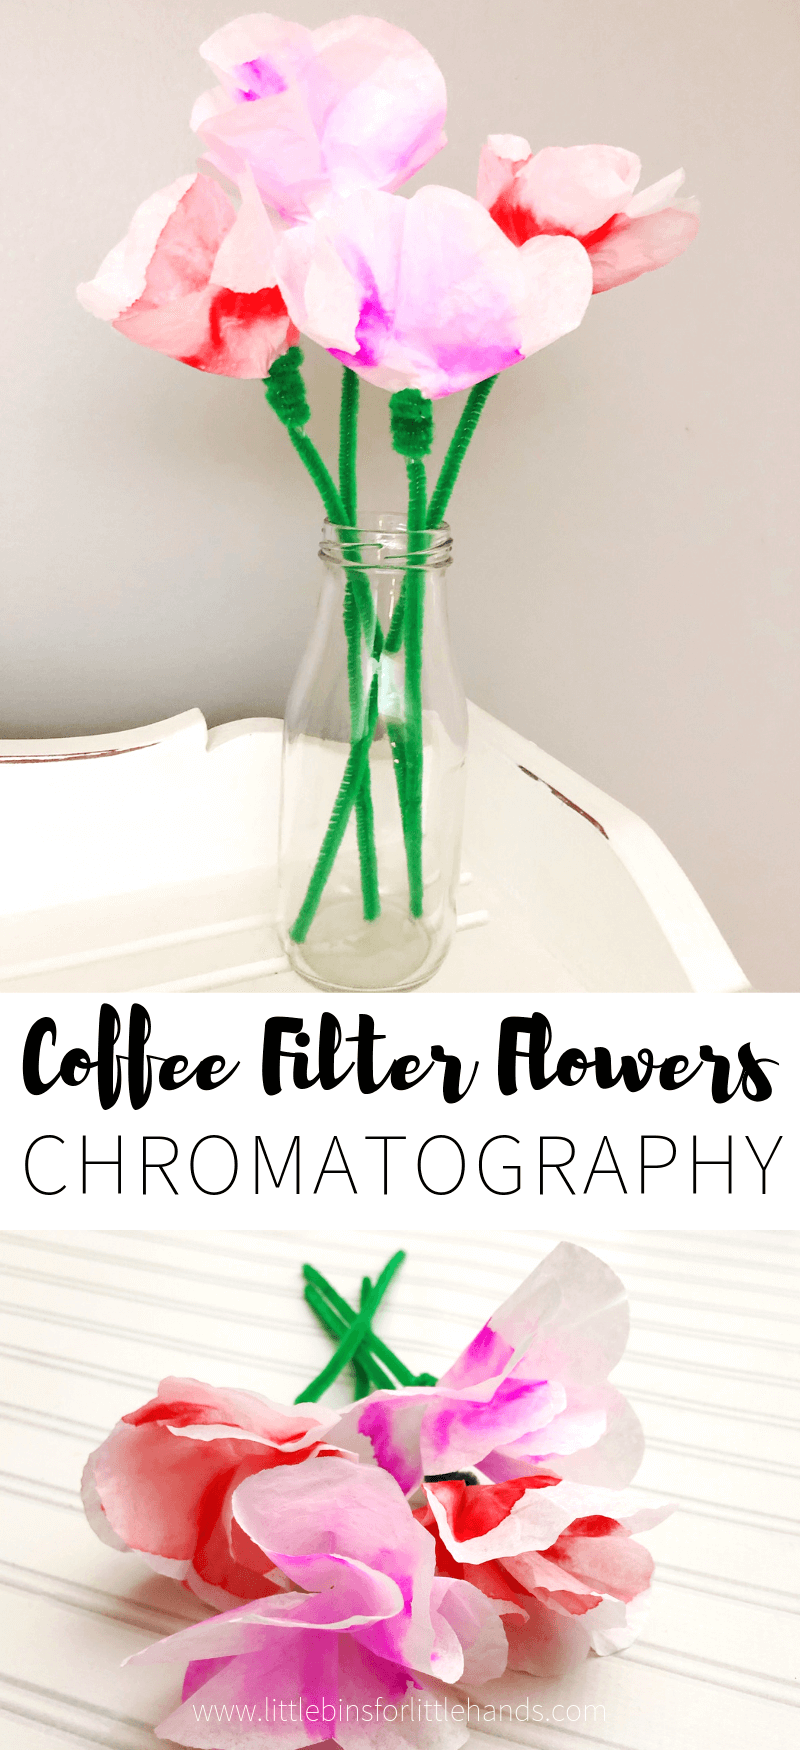 Learn how to make coffee filter flowers for simple solubility science and STEAM activity.